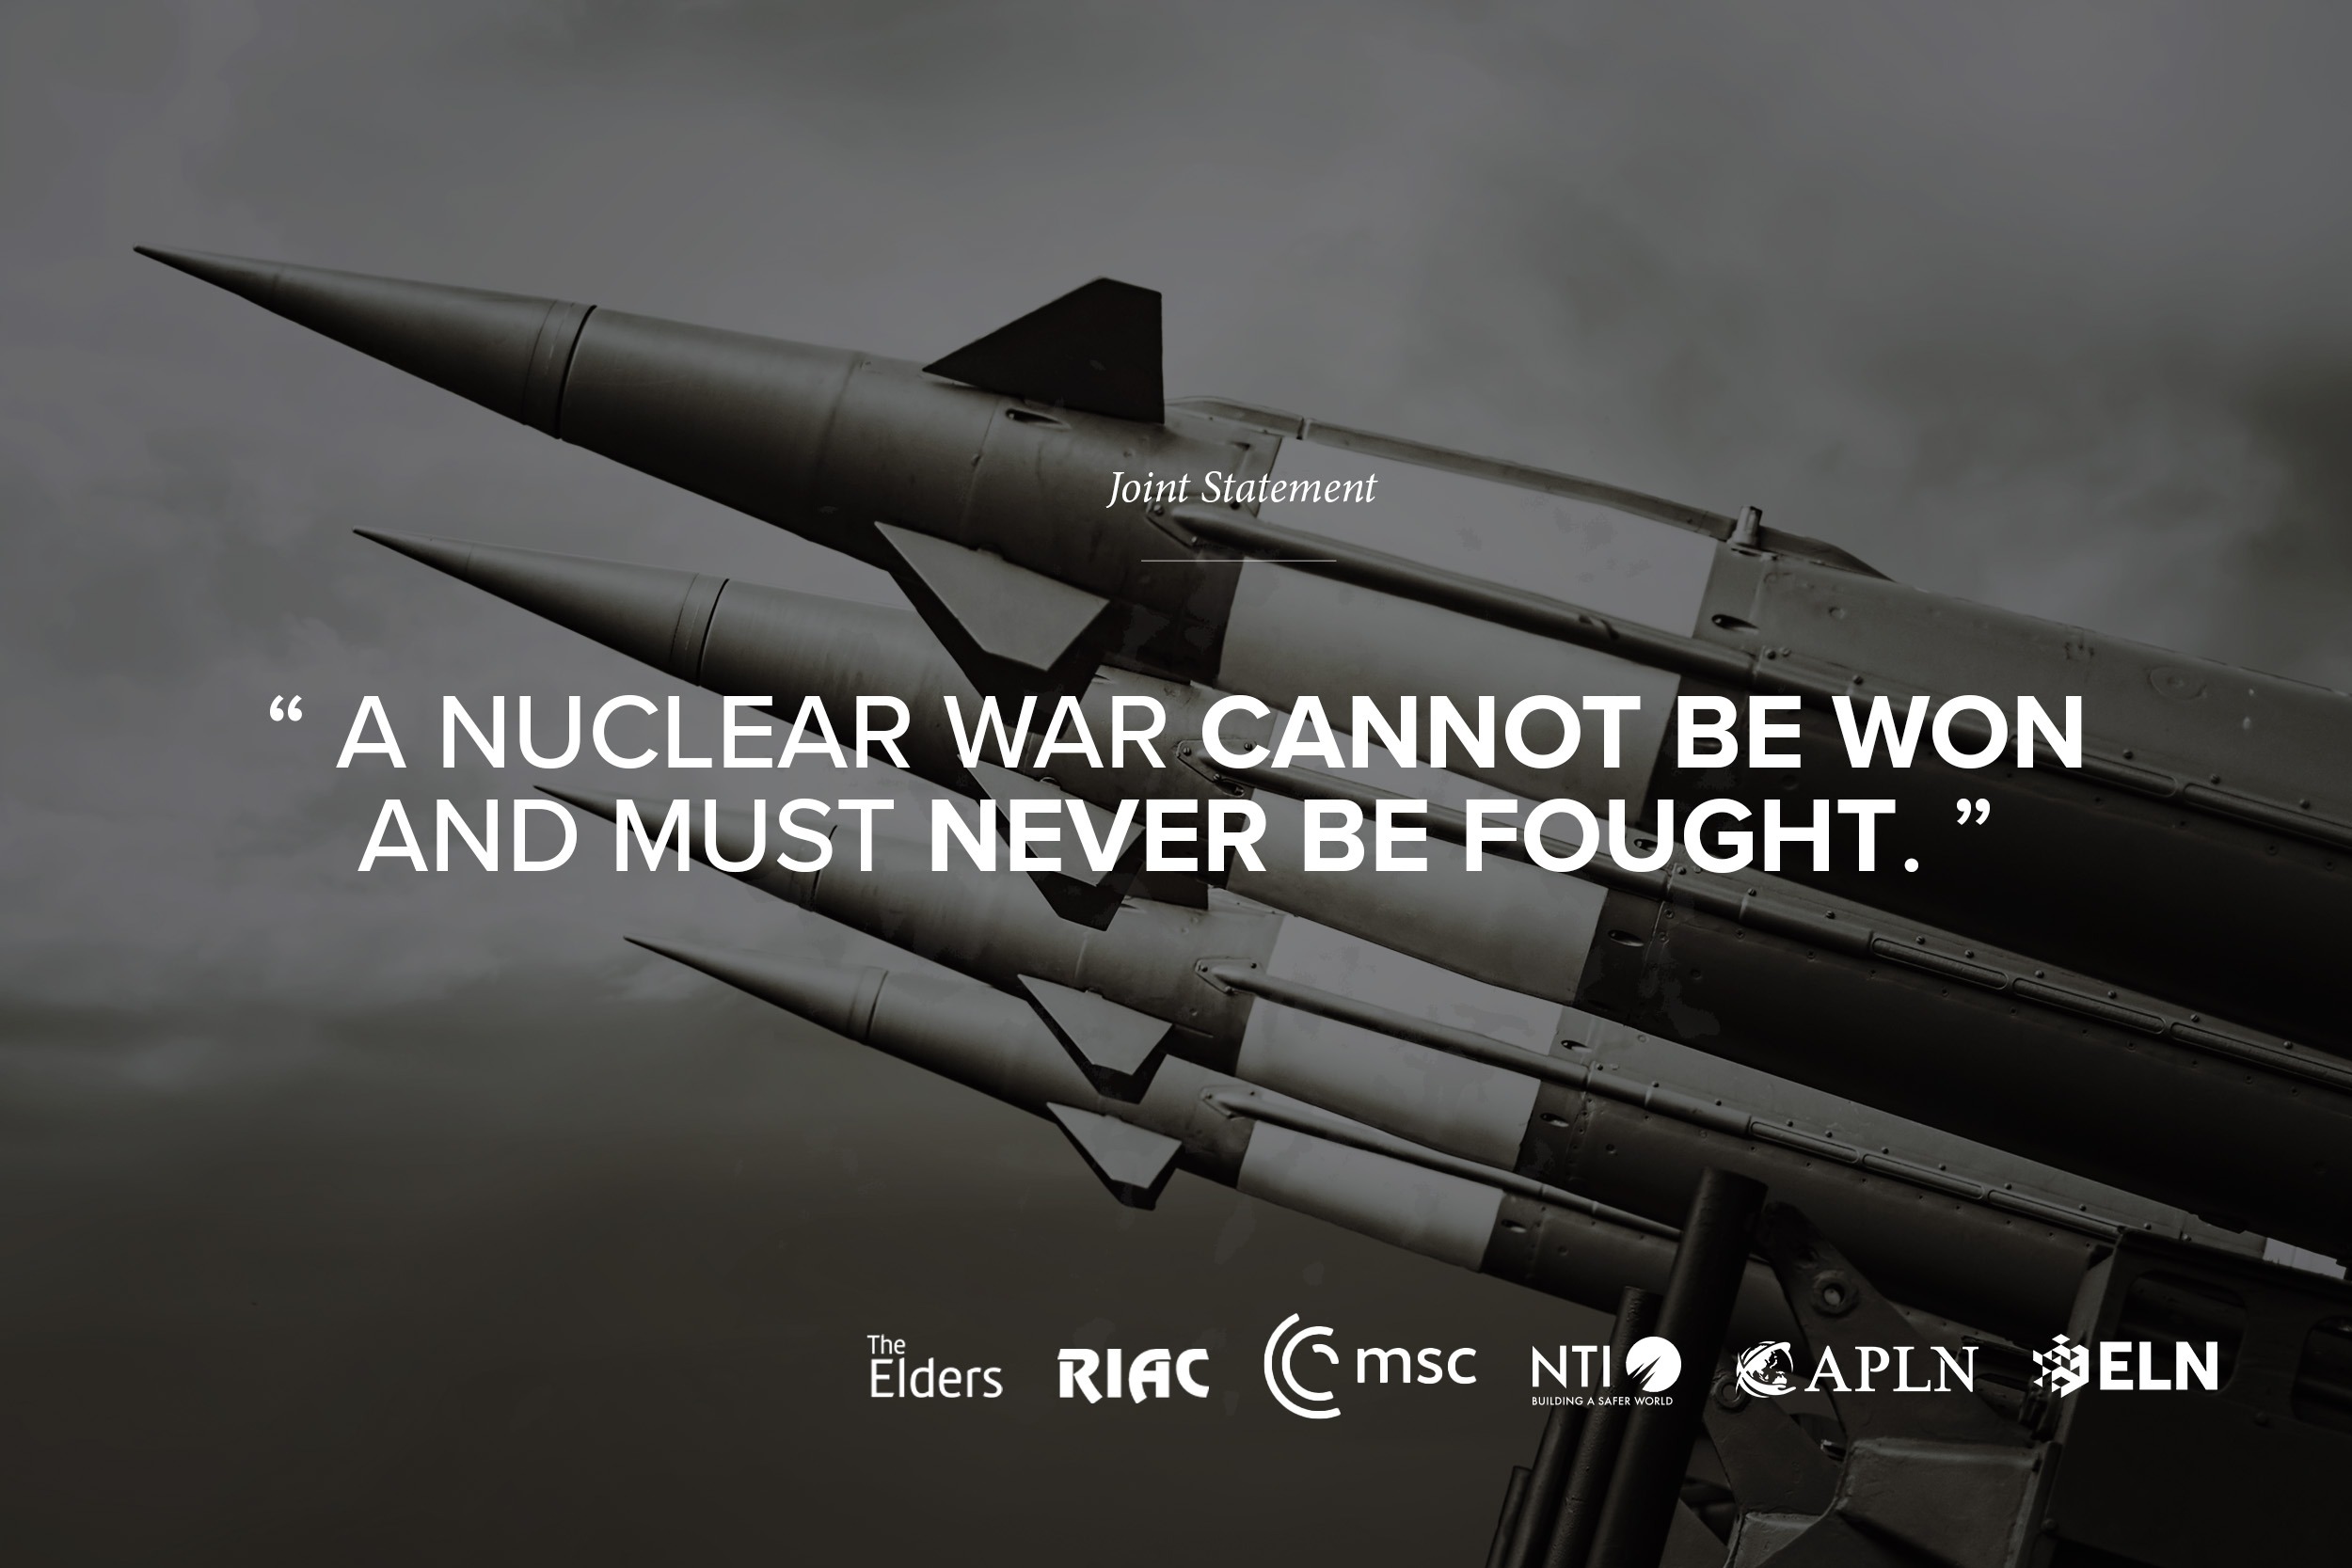 “A Nuclear War Cannot Be Won and Must Never be Fought”